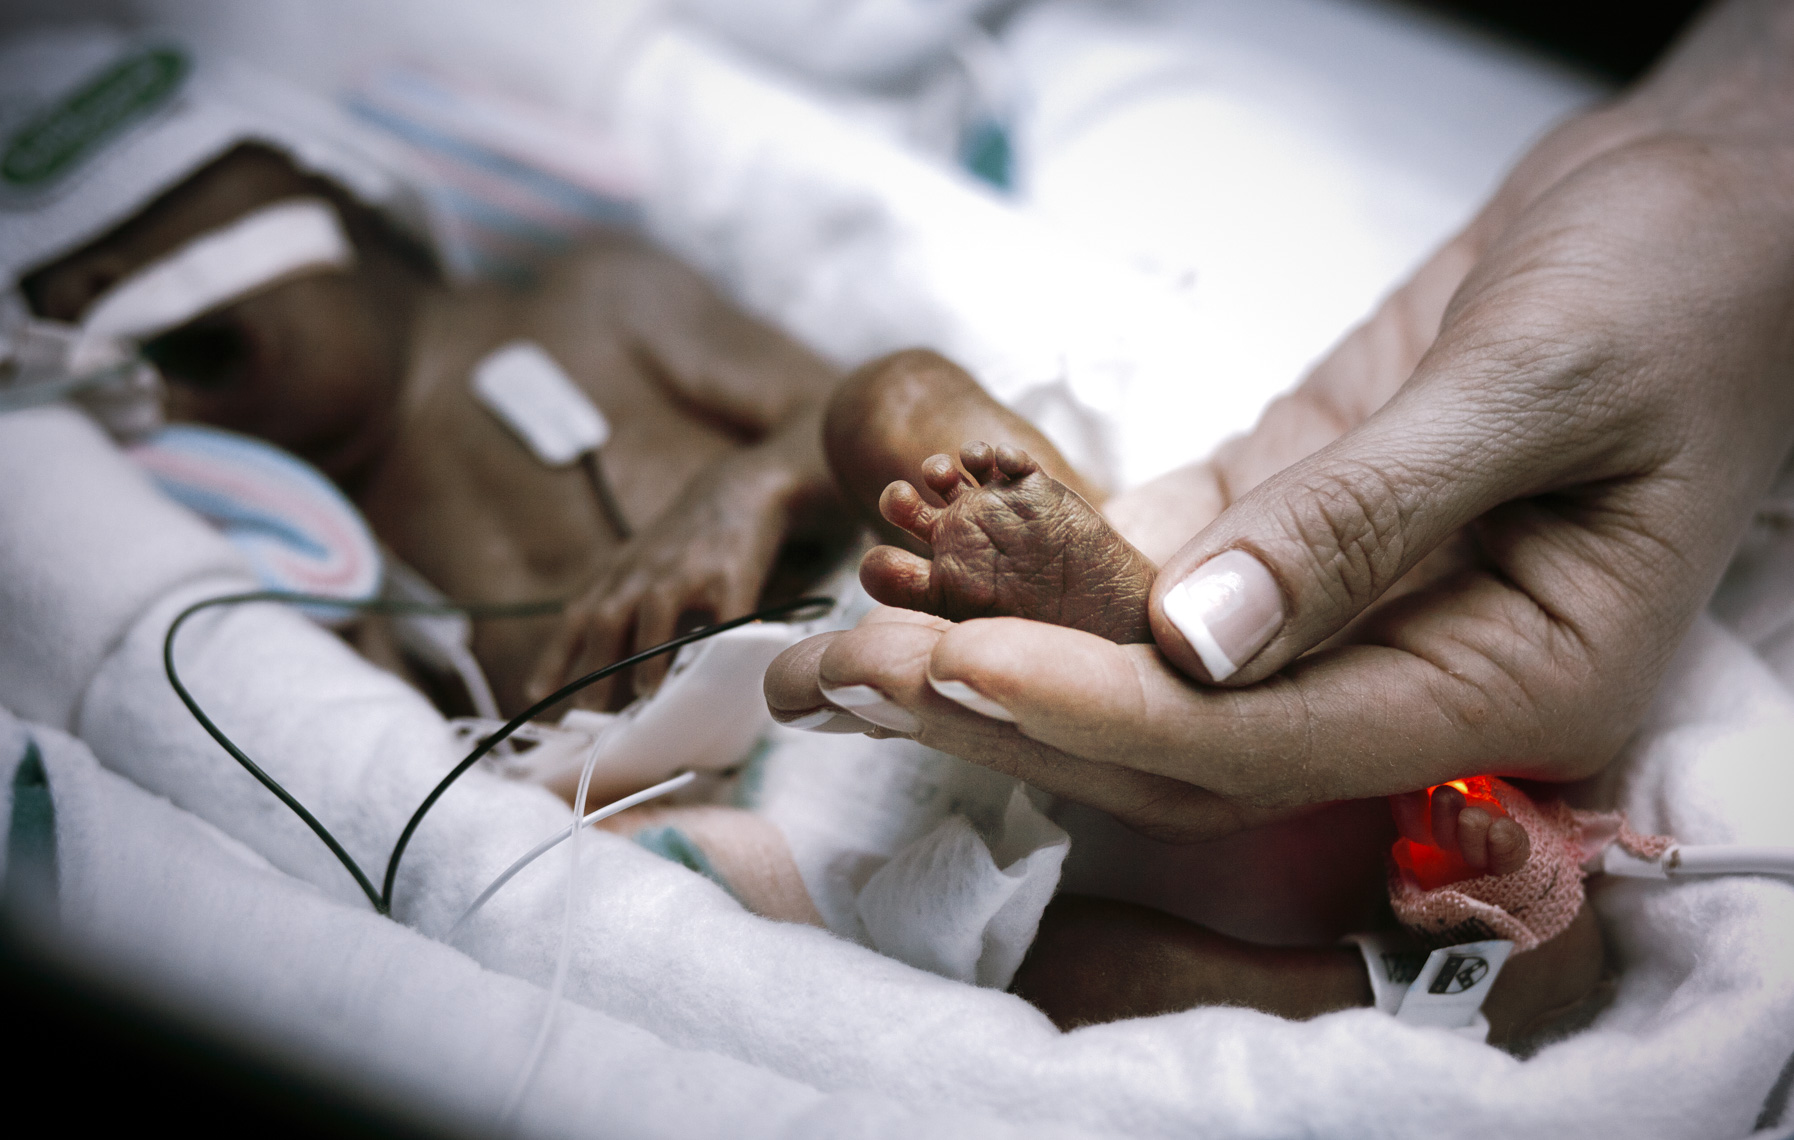 A nurse touches the foot of a premature baby in the Neonatal Intensive Care Unit of a hospital in Philadelphia.